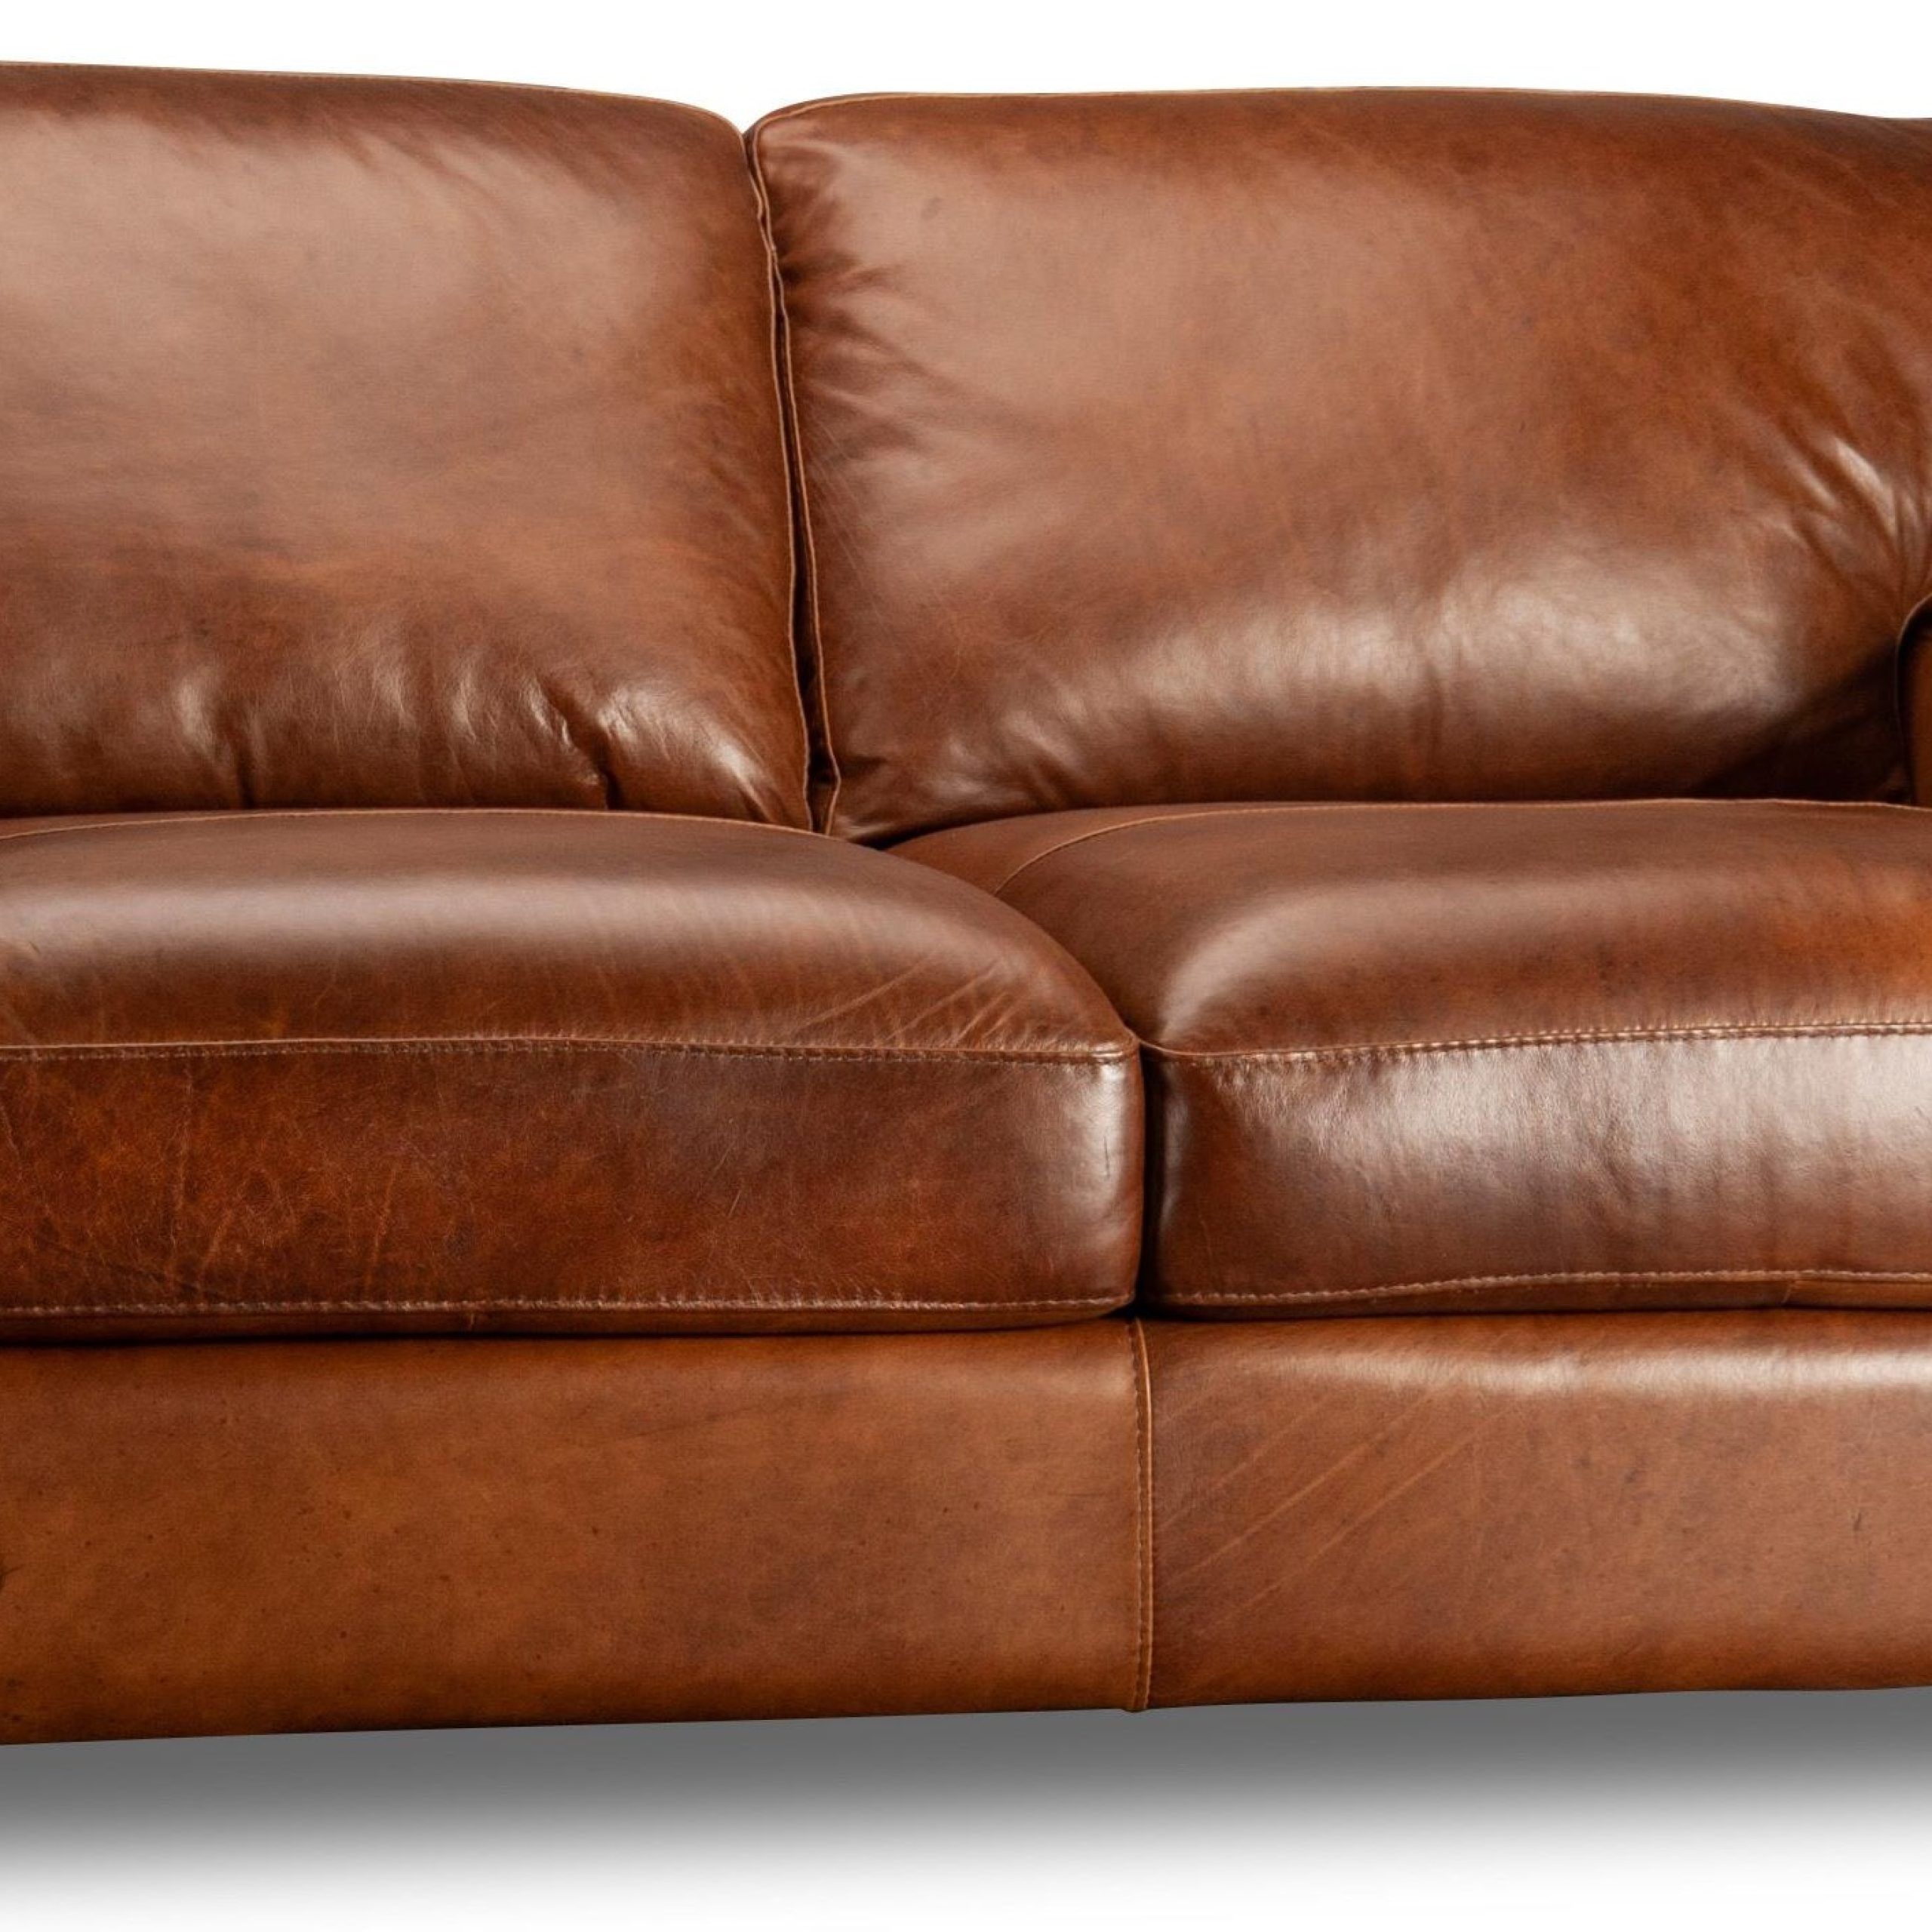 Soft Line Pietro Top Grain Leather Loveseat | Morris Home | Loveseats With Top Grain Leather Loveseats (View 8 of 20)